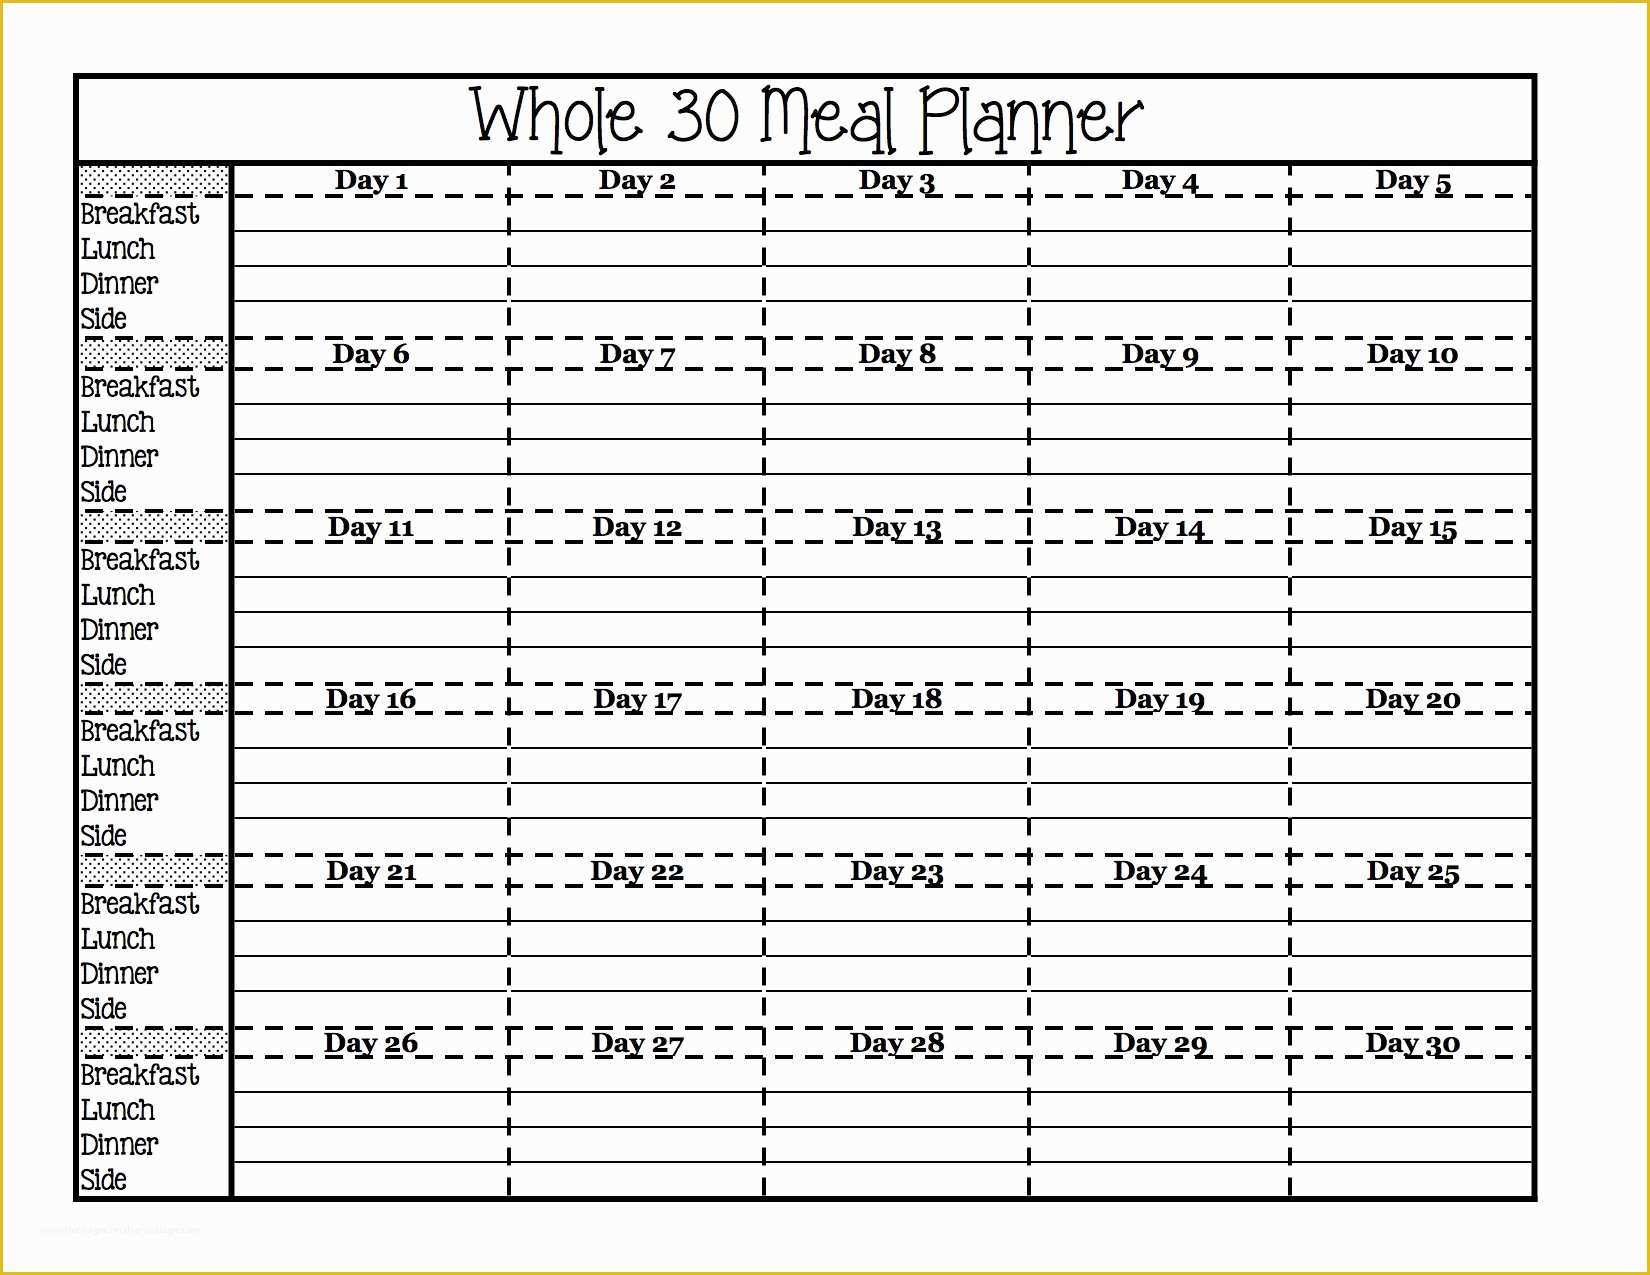 Free Meal Planner Template Of Preparing Your whole30 Free Printables Fit Your whole